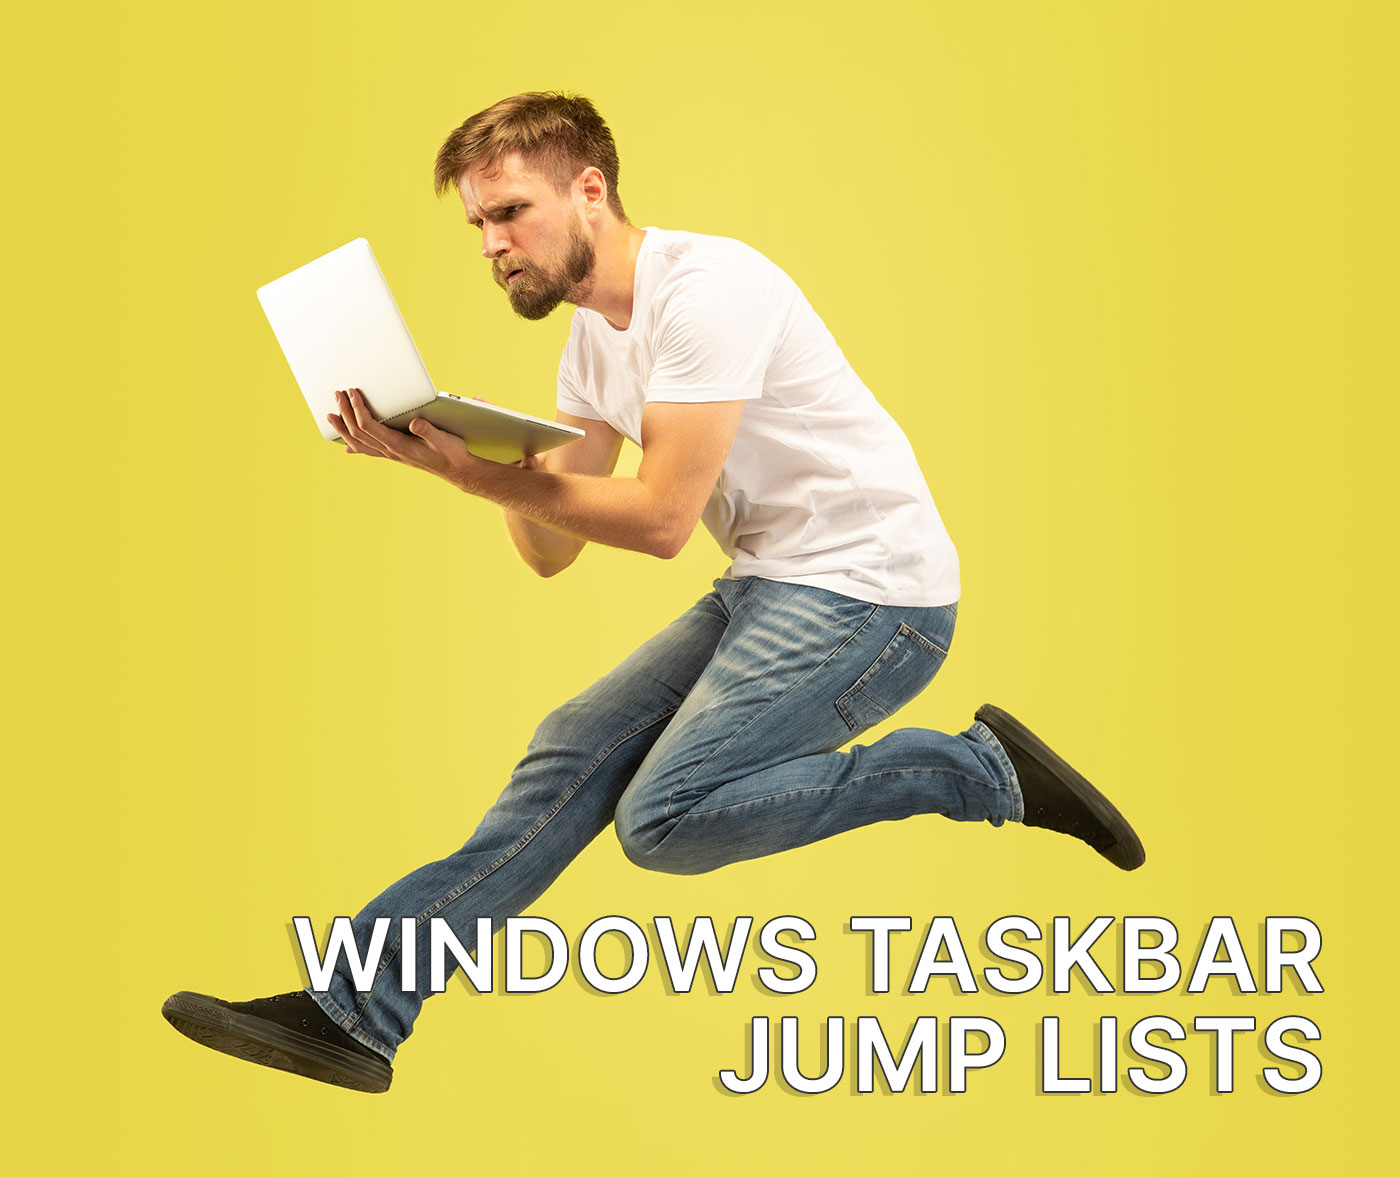 Use jump lists in Windows to quickly access recent items